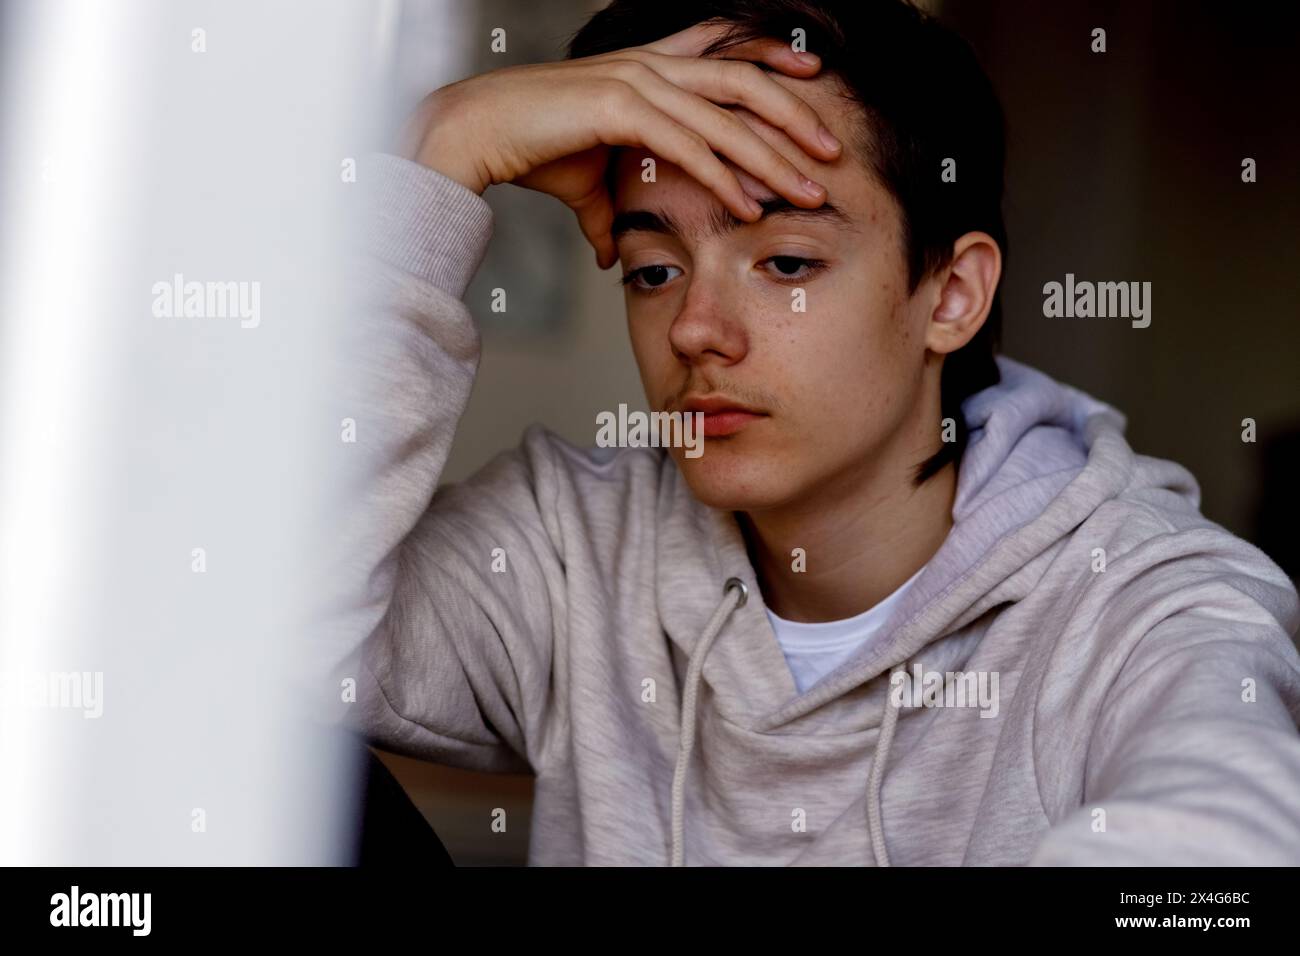 Portrait of a sad teenager in casual clothes Stock Photo